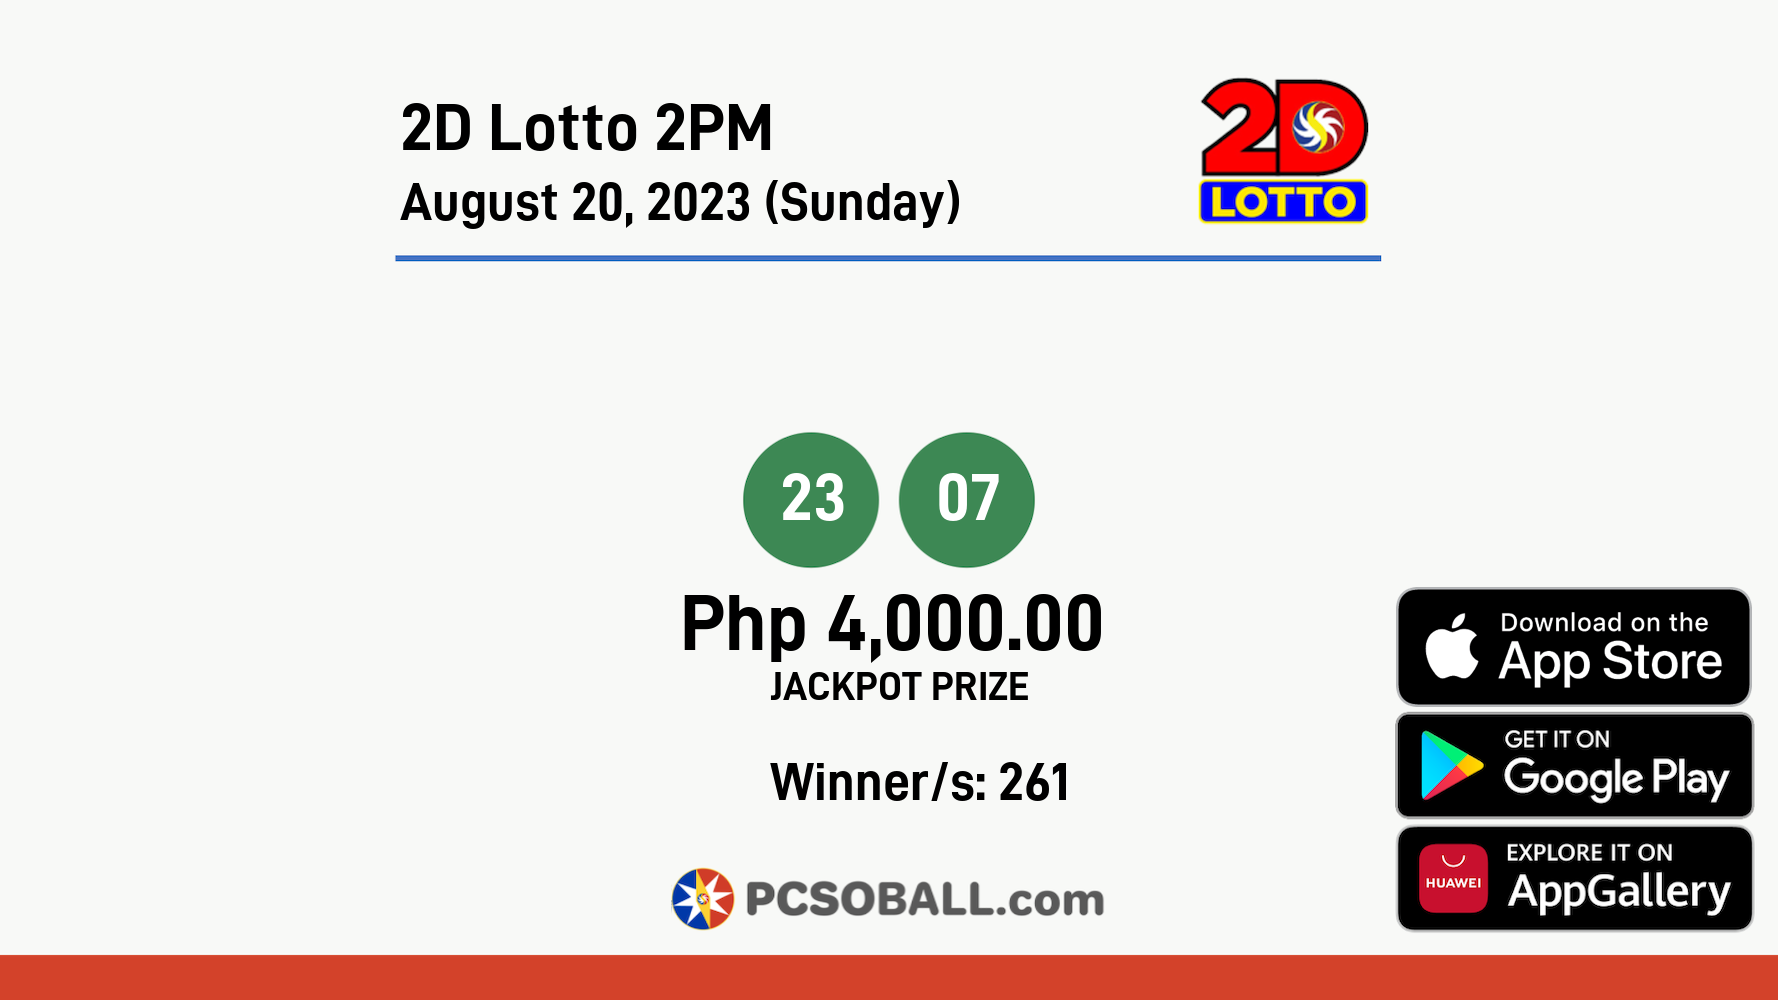 2D Lotto 2PM August 20, 2023 (Sunday) Result